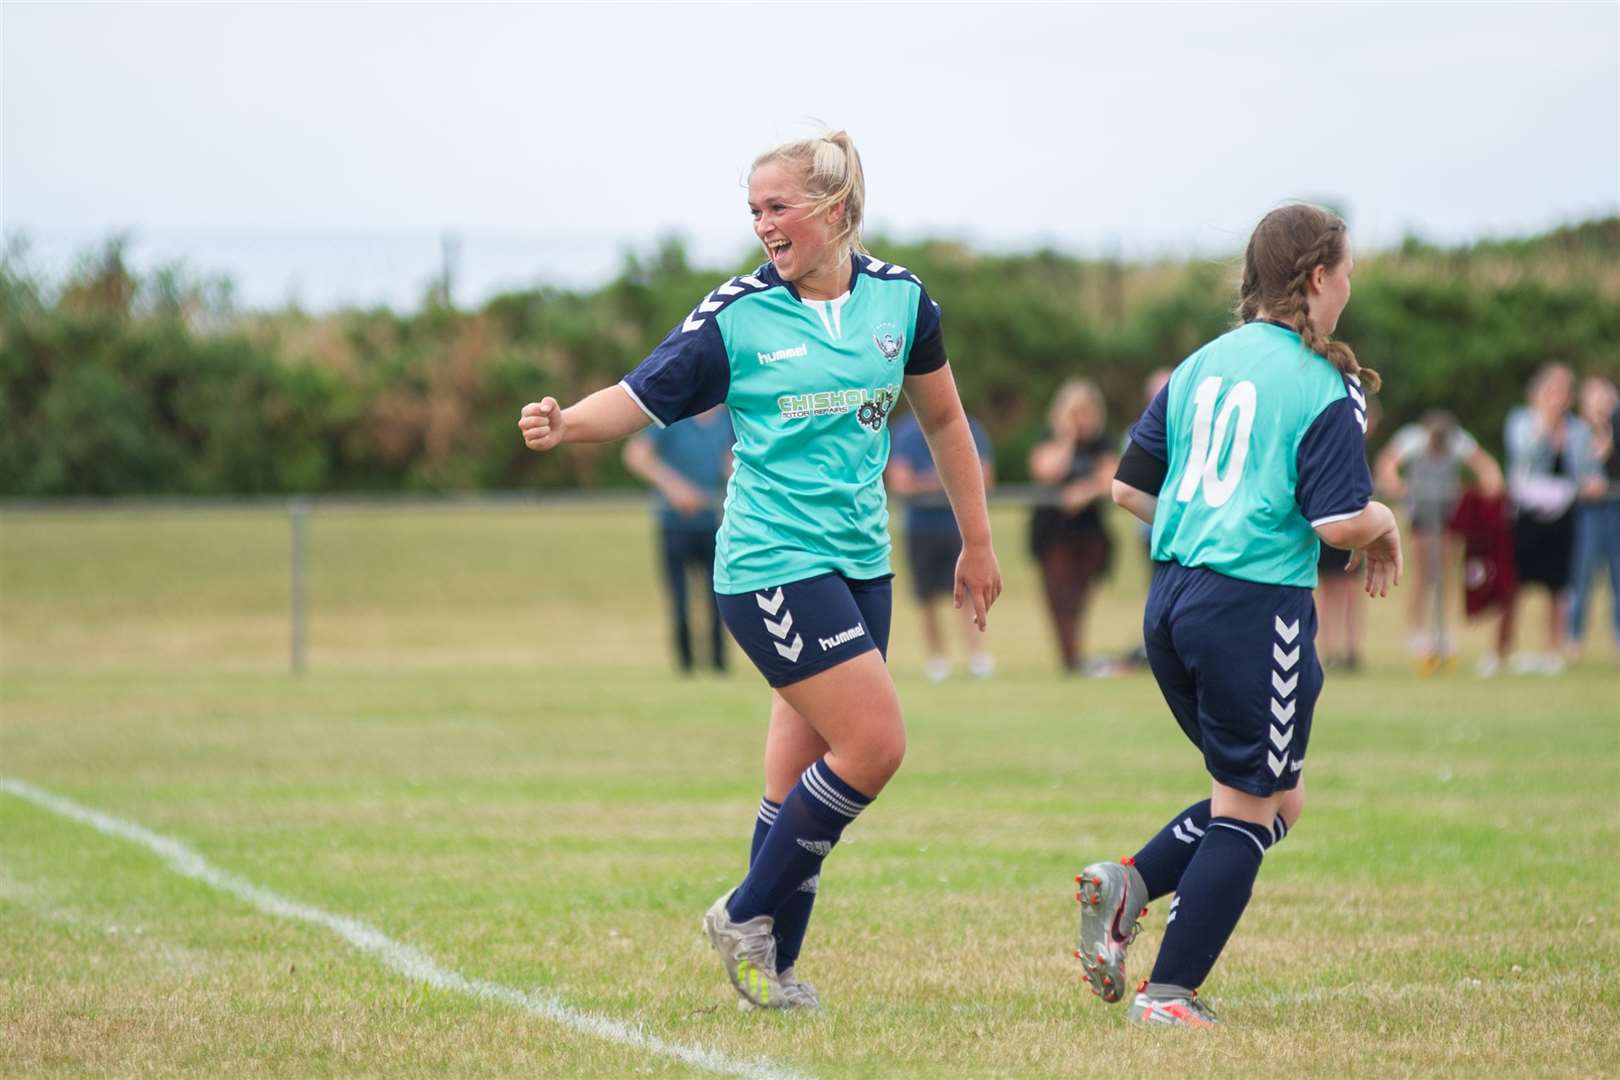 Claiming her fourth goal in just two games was Emily McAuslan. Picture: Daniel Forsyth